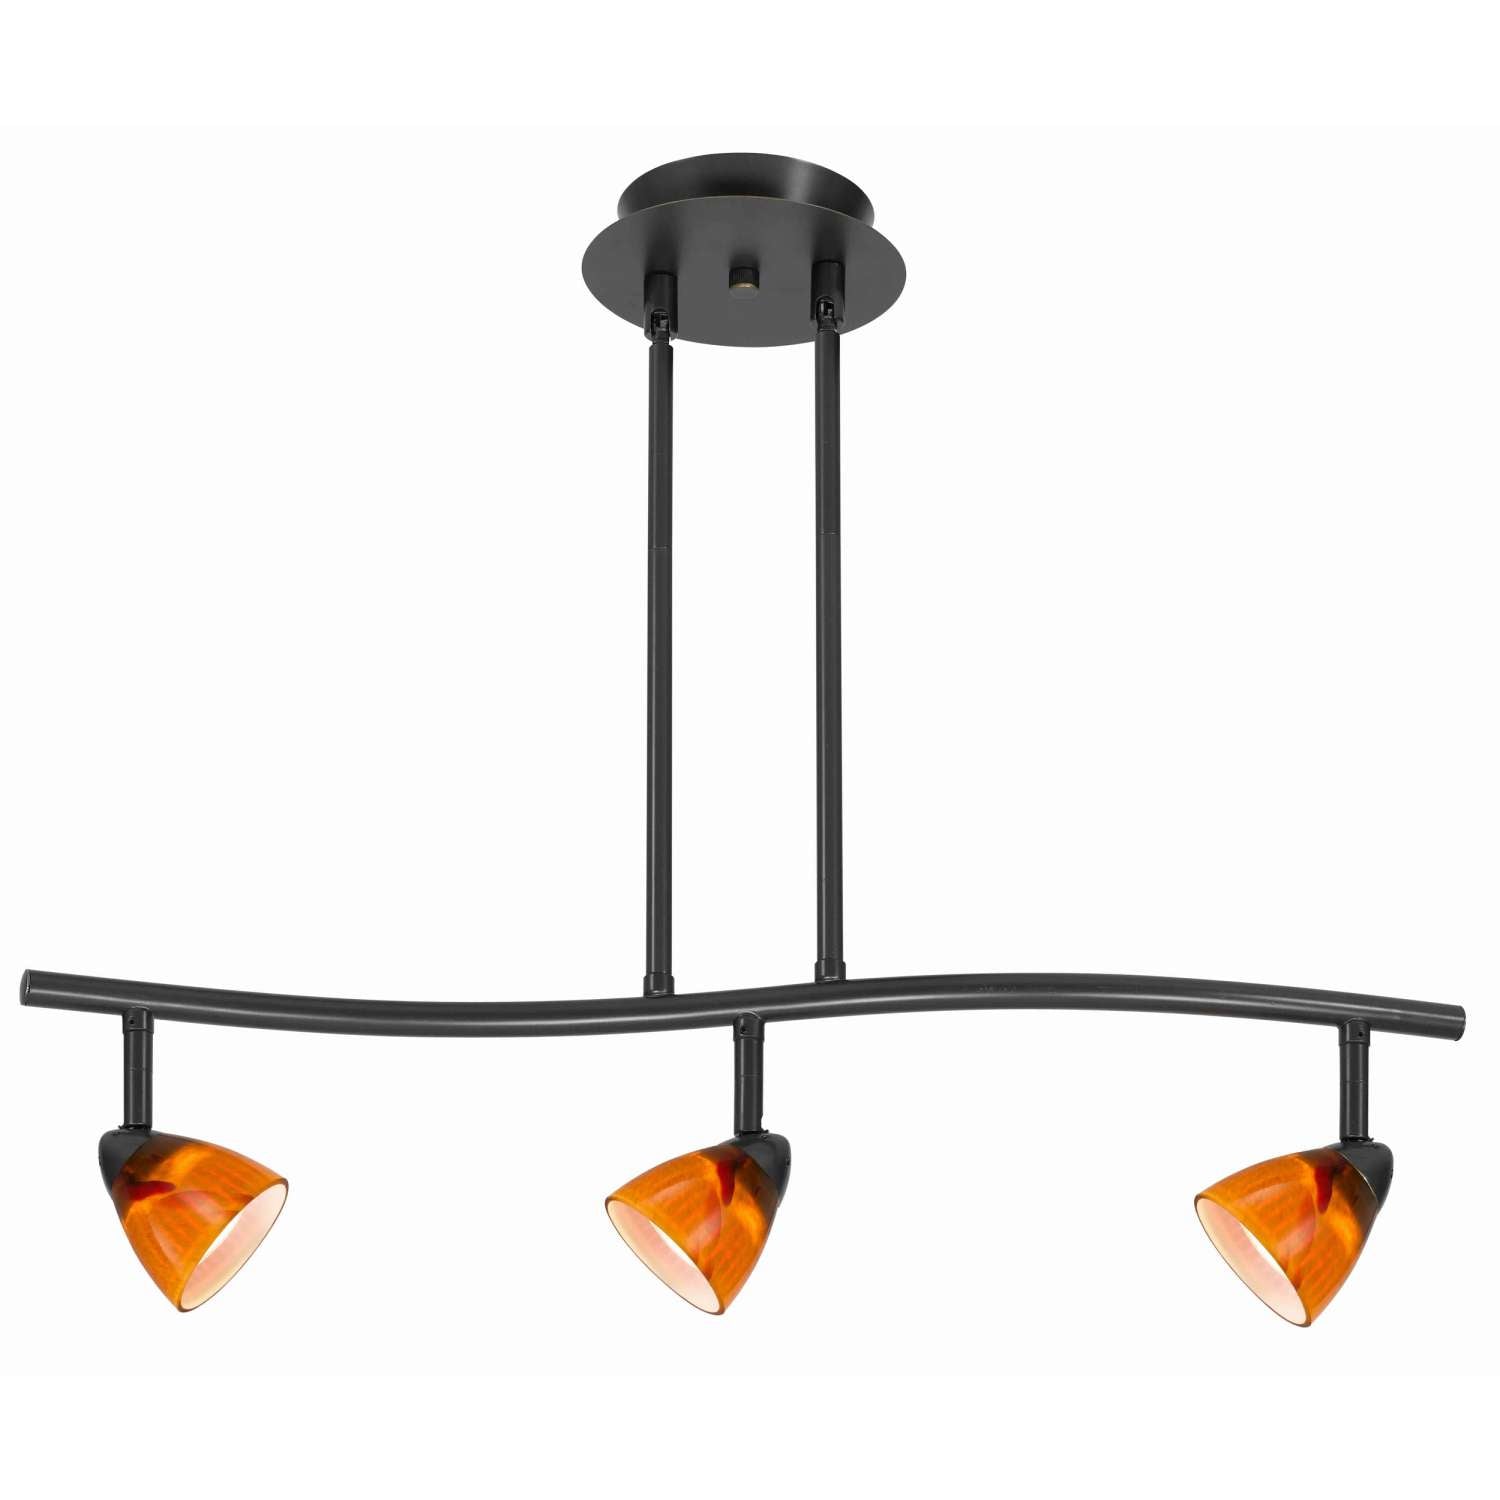 3 Light 120V Metal Track Light Fixture With Glass Shade, Black And Orange By Benzara